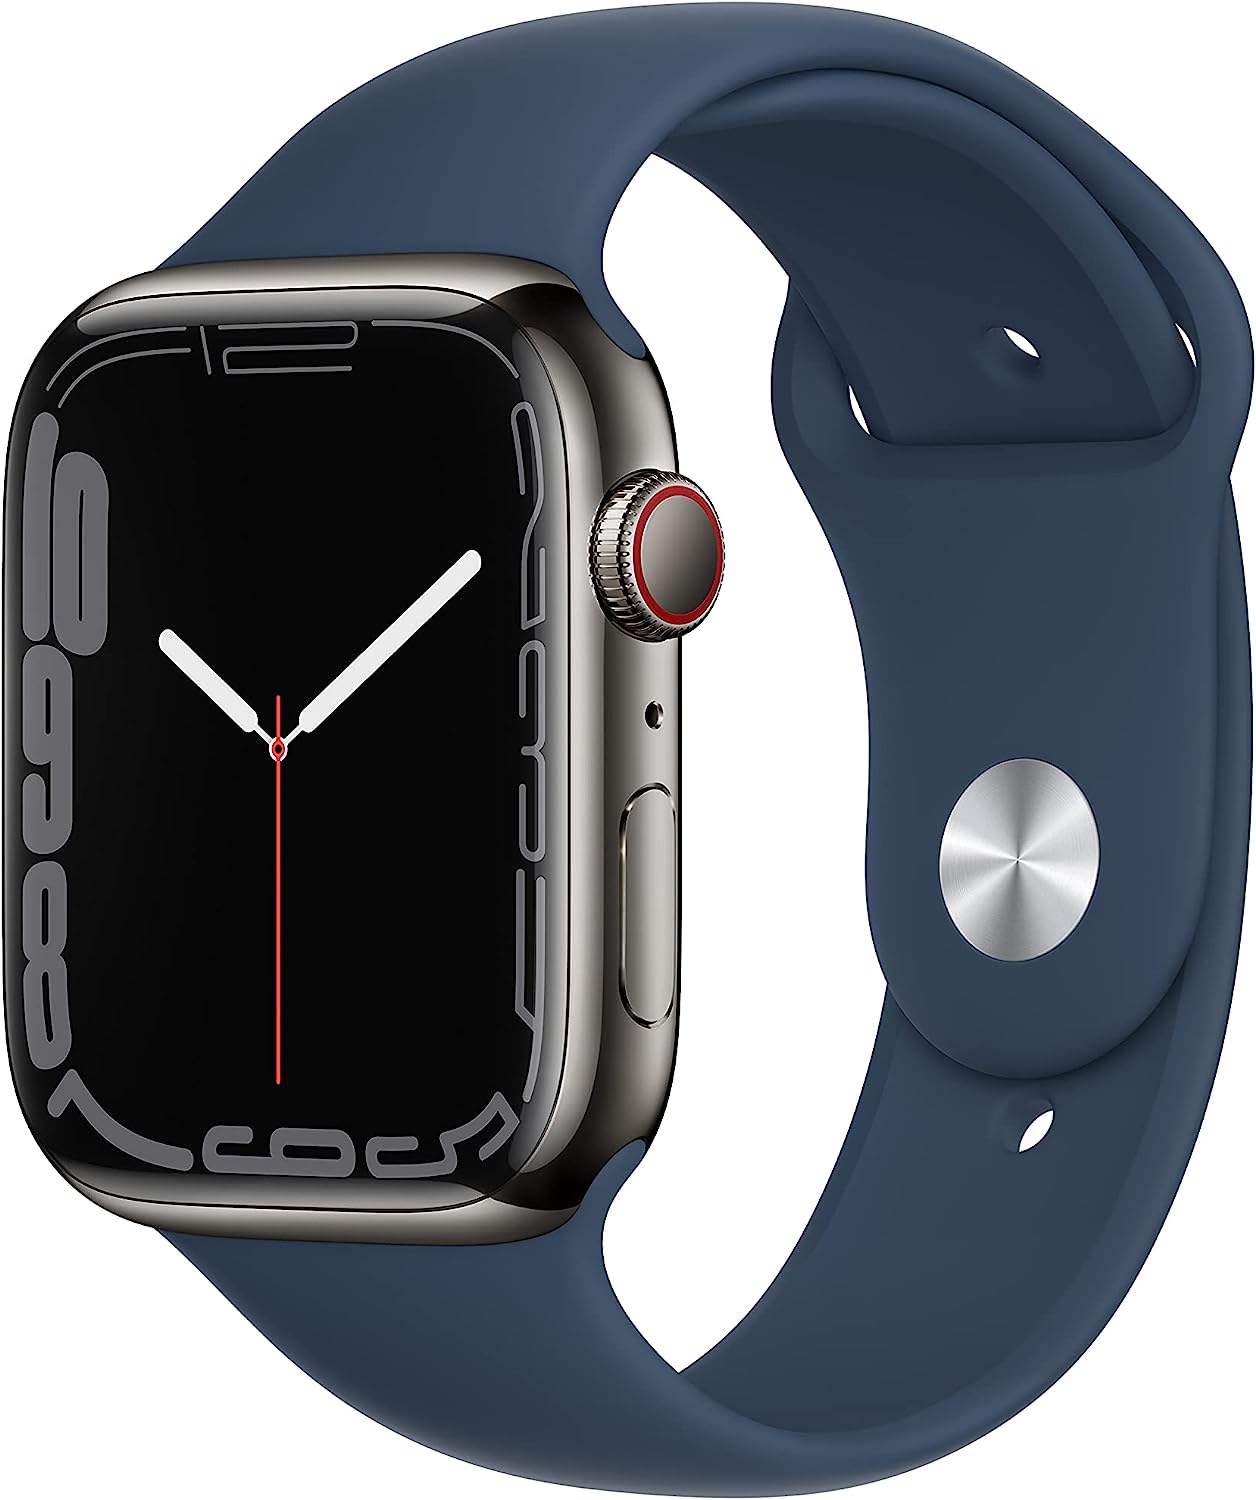 Apple Watch Series 7 [GPS + Cellular 45mm] Smart Watch w/Graphite Stainless Steel Case with Abyss Blue Sport Band. Fitness Tracker, Blood Oxygen & ECG Apps, Always-On Ret - $380